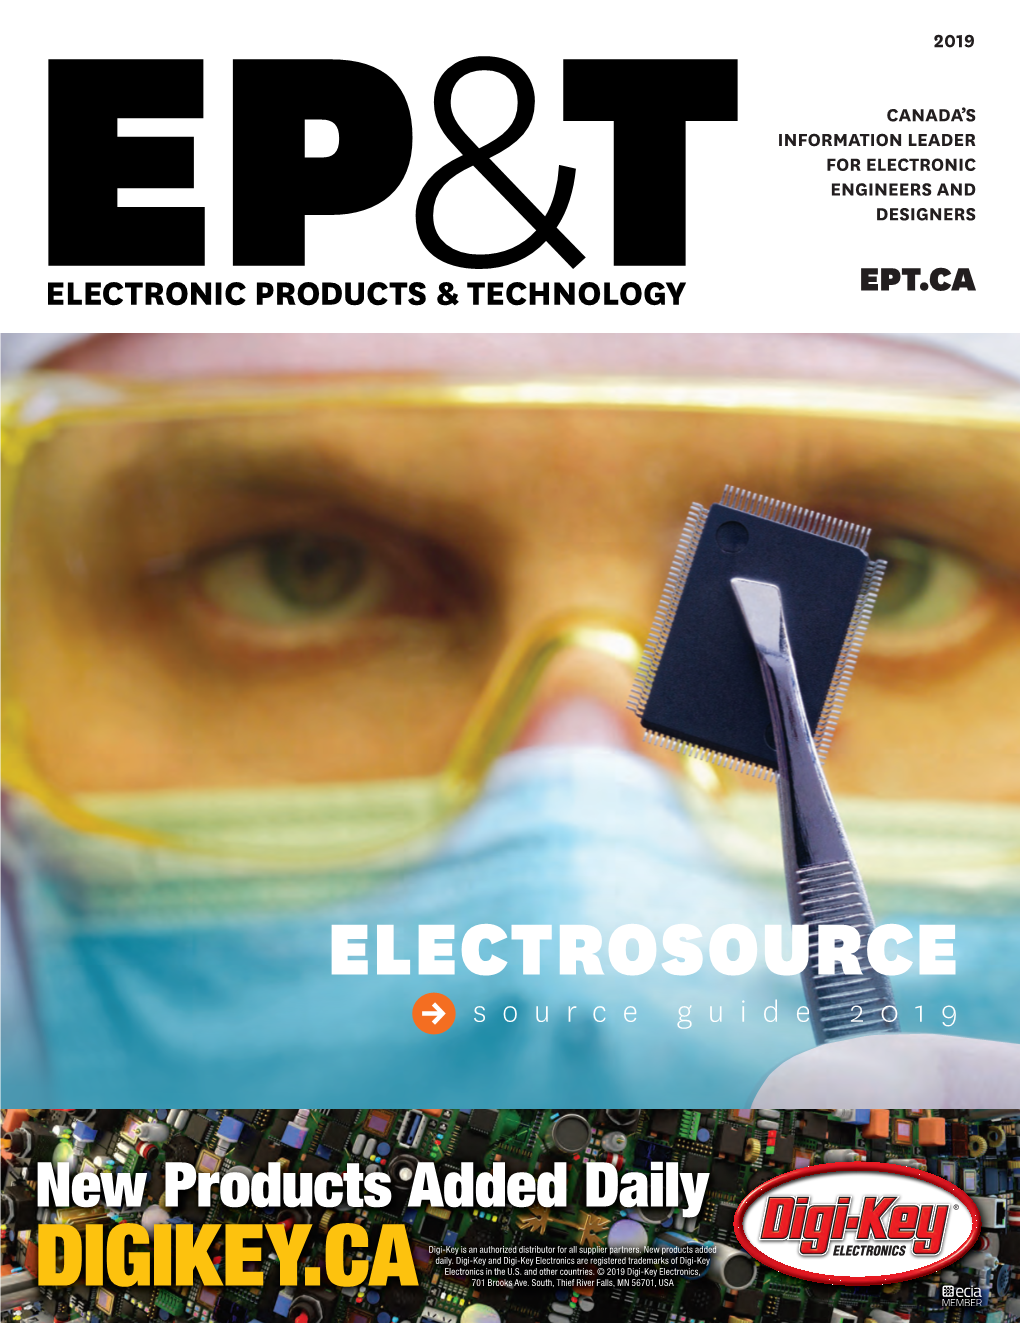 ELECTROSOURCE Source Guide 2019